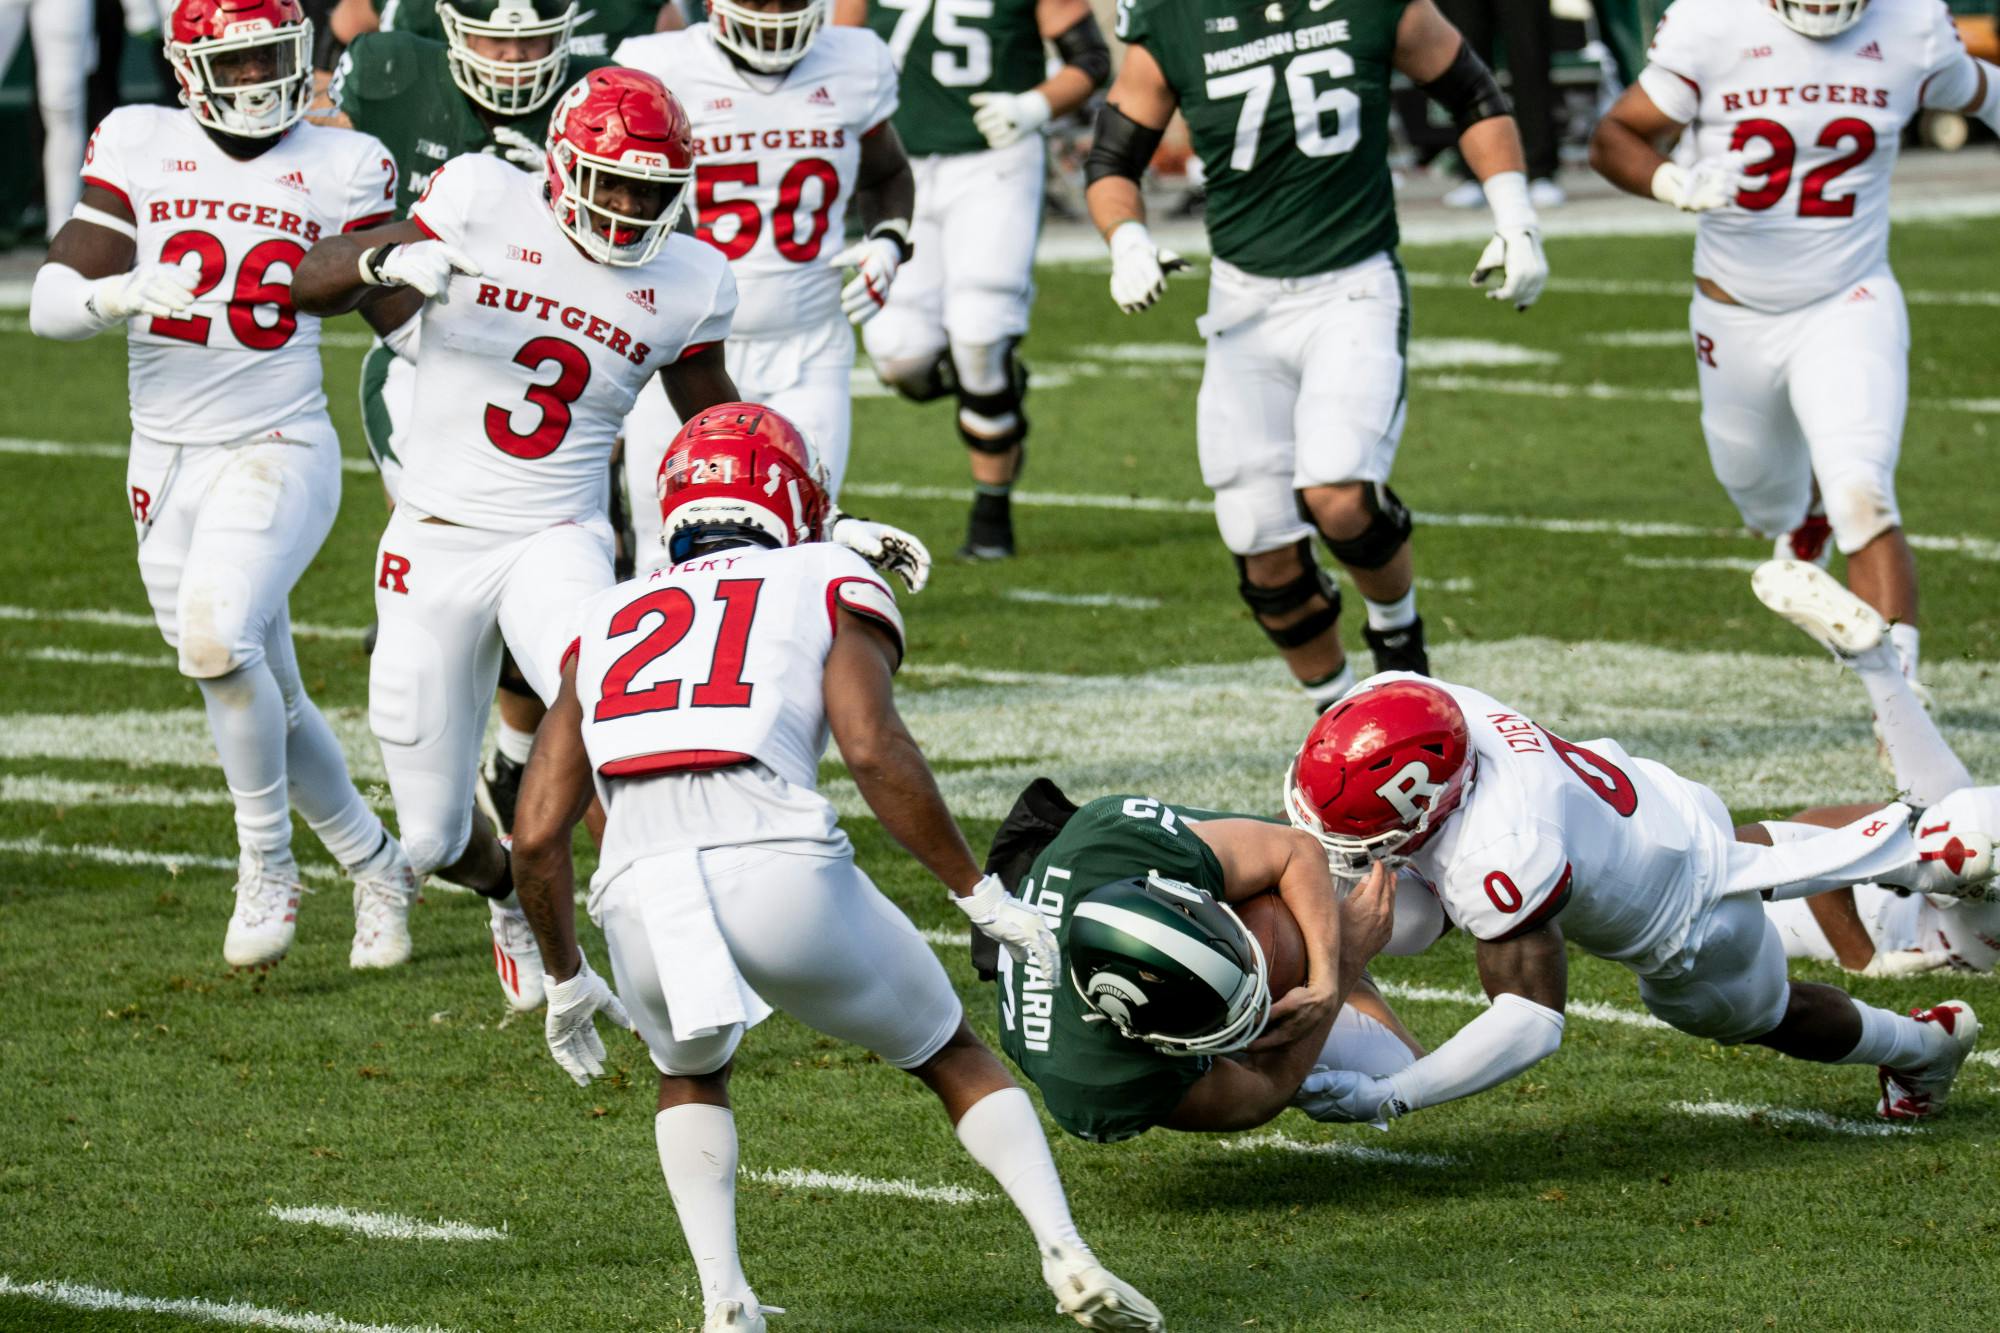 <p>Former quarterback Rocky Lombardi gets tackled in a game against Rutgers on Oct. 24, 2020.</p>